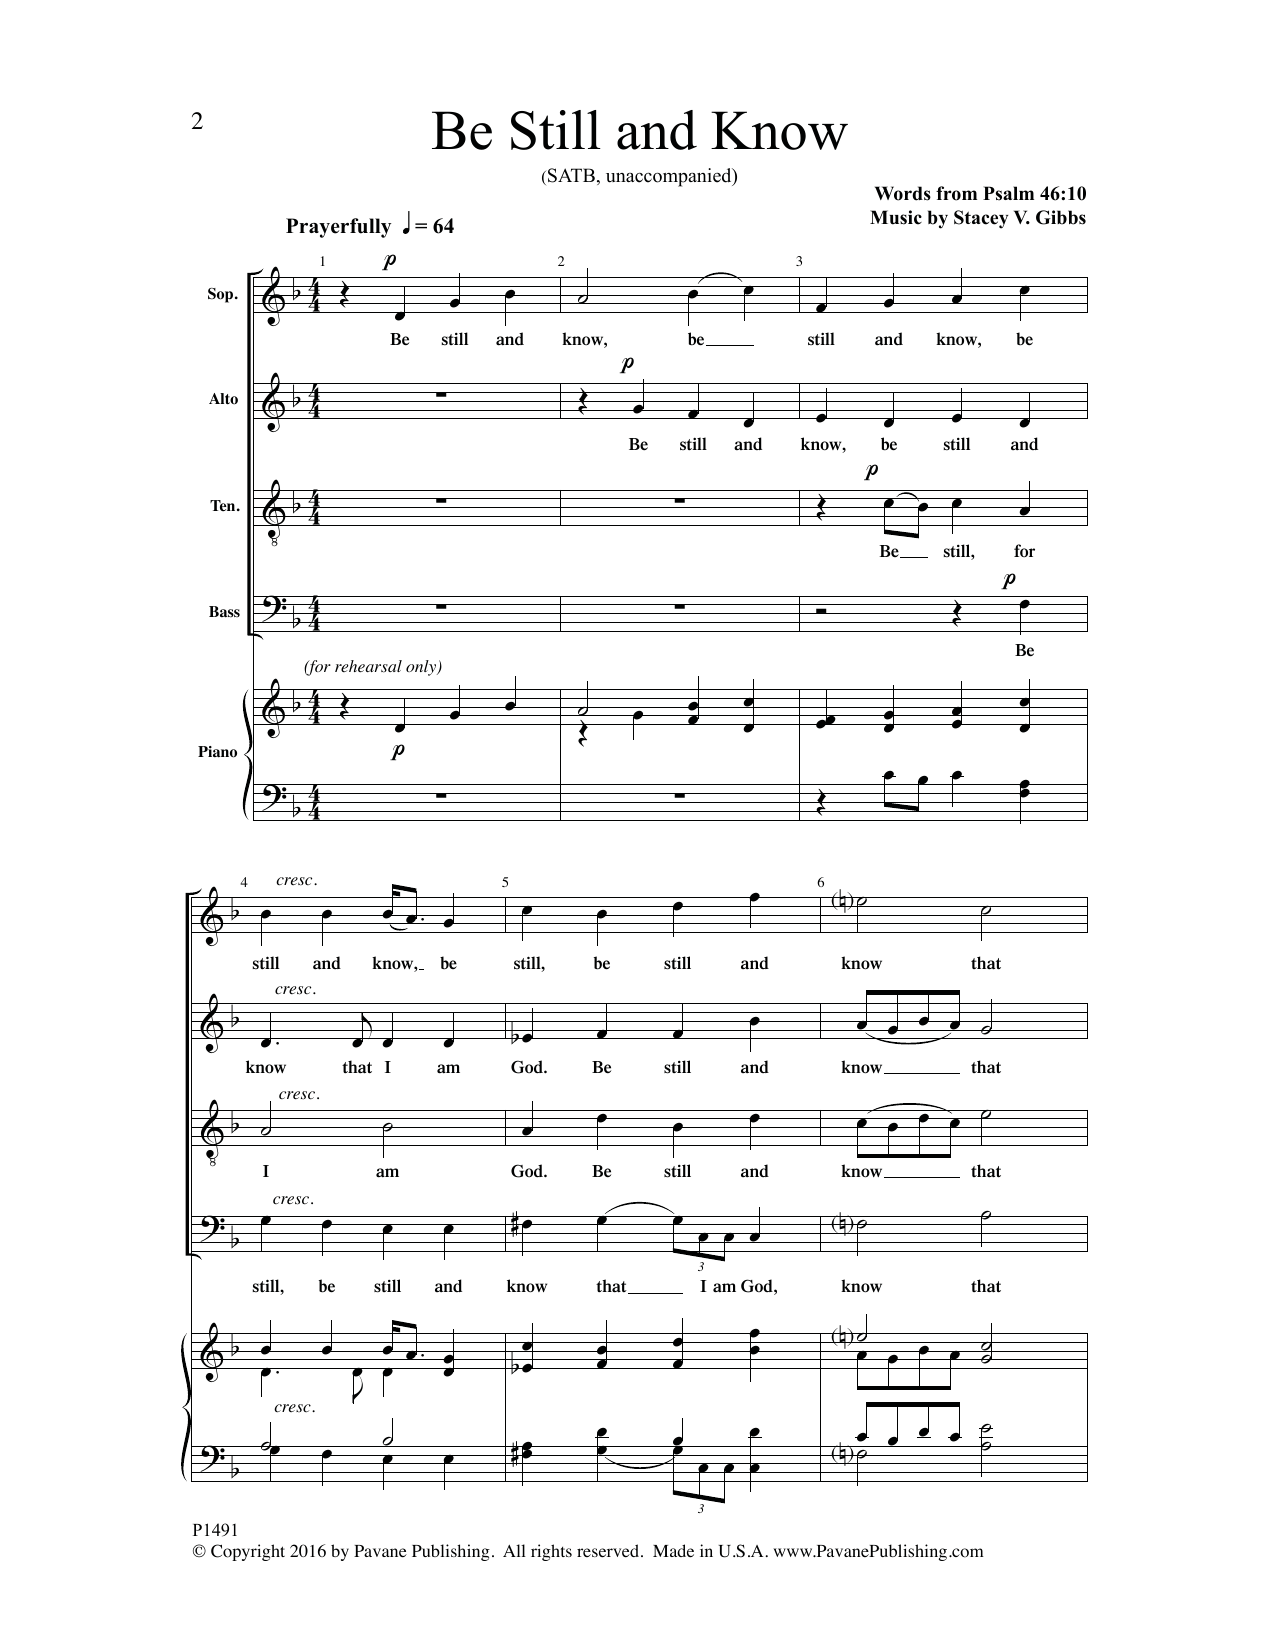 Download Stacey V. Gibbs Be Still and Know Sheet Music